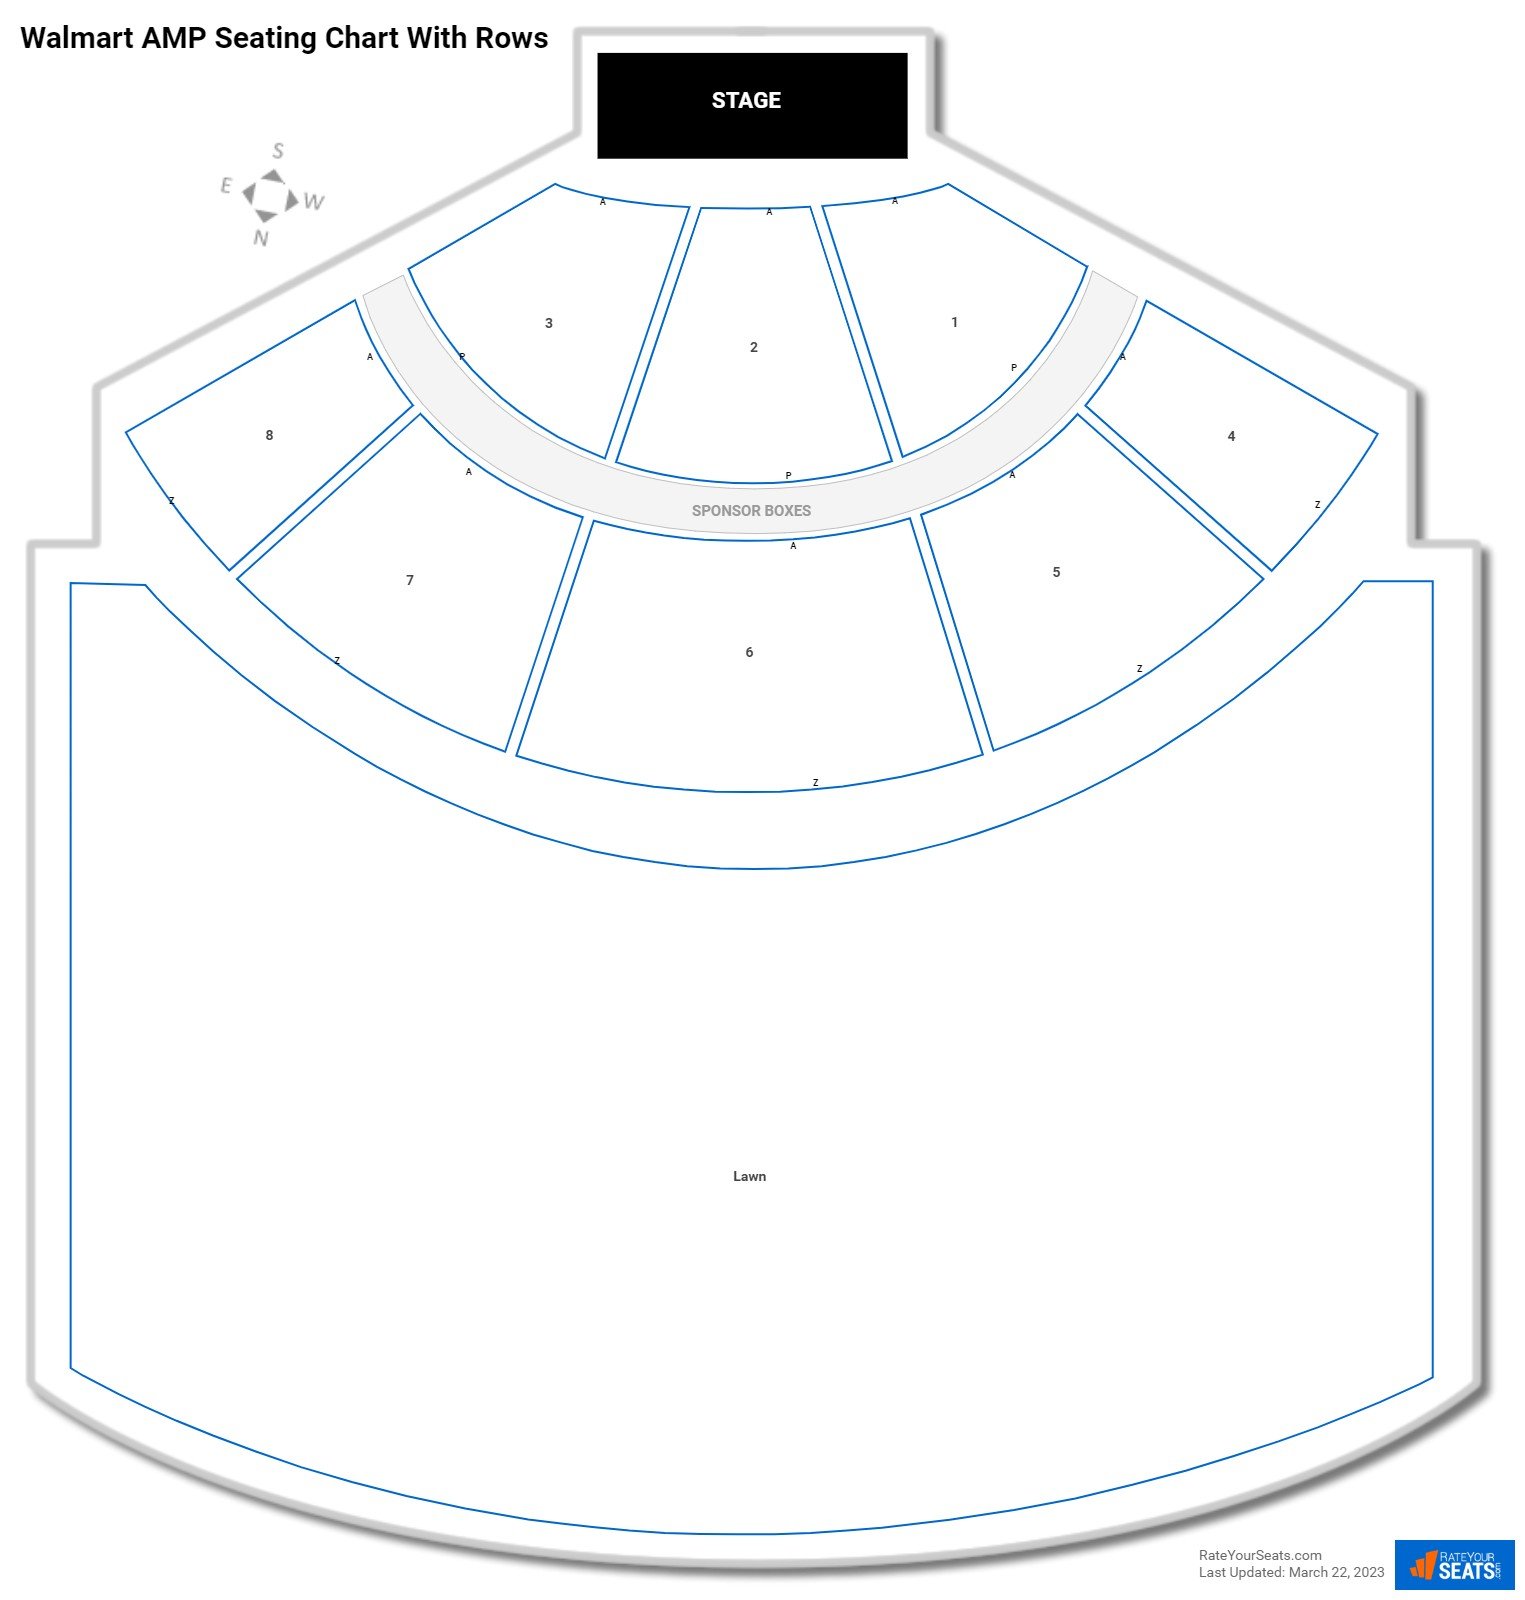 Walmart AMP seating chart with row numbers